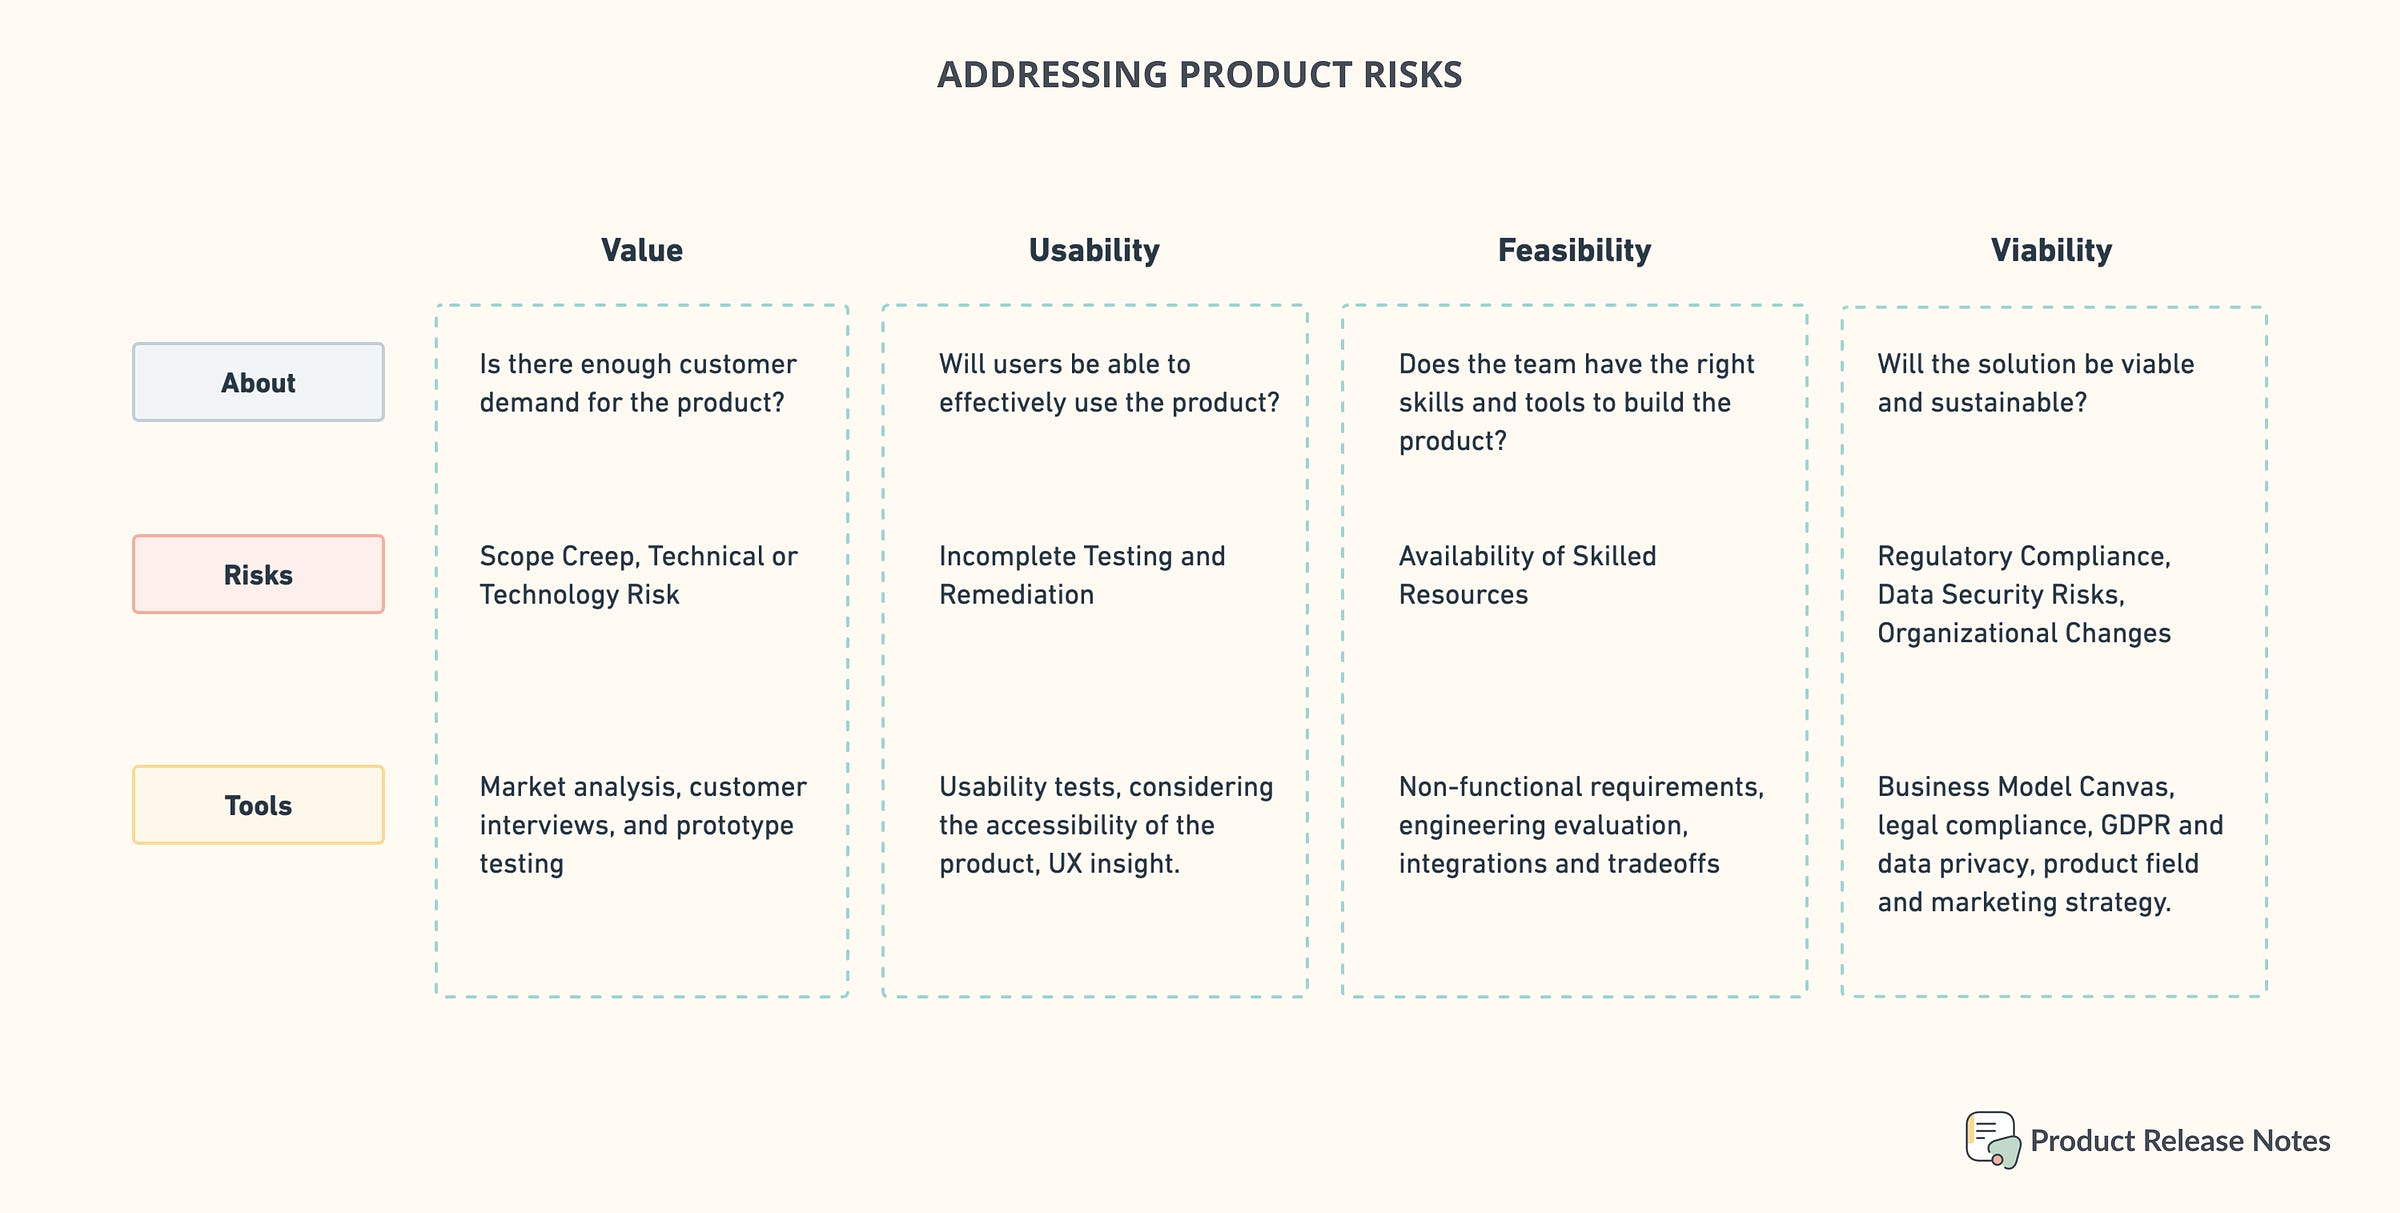 Useful tools to address product risks.